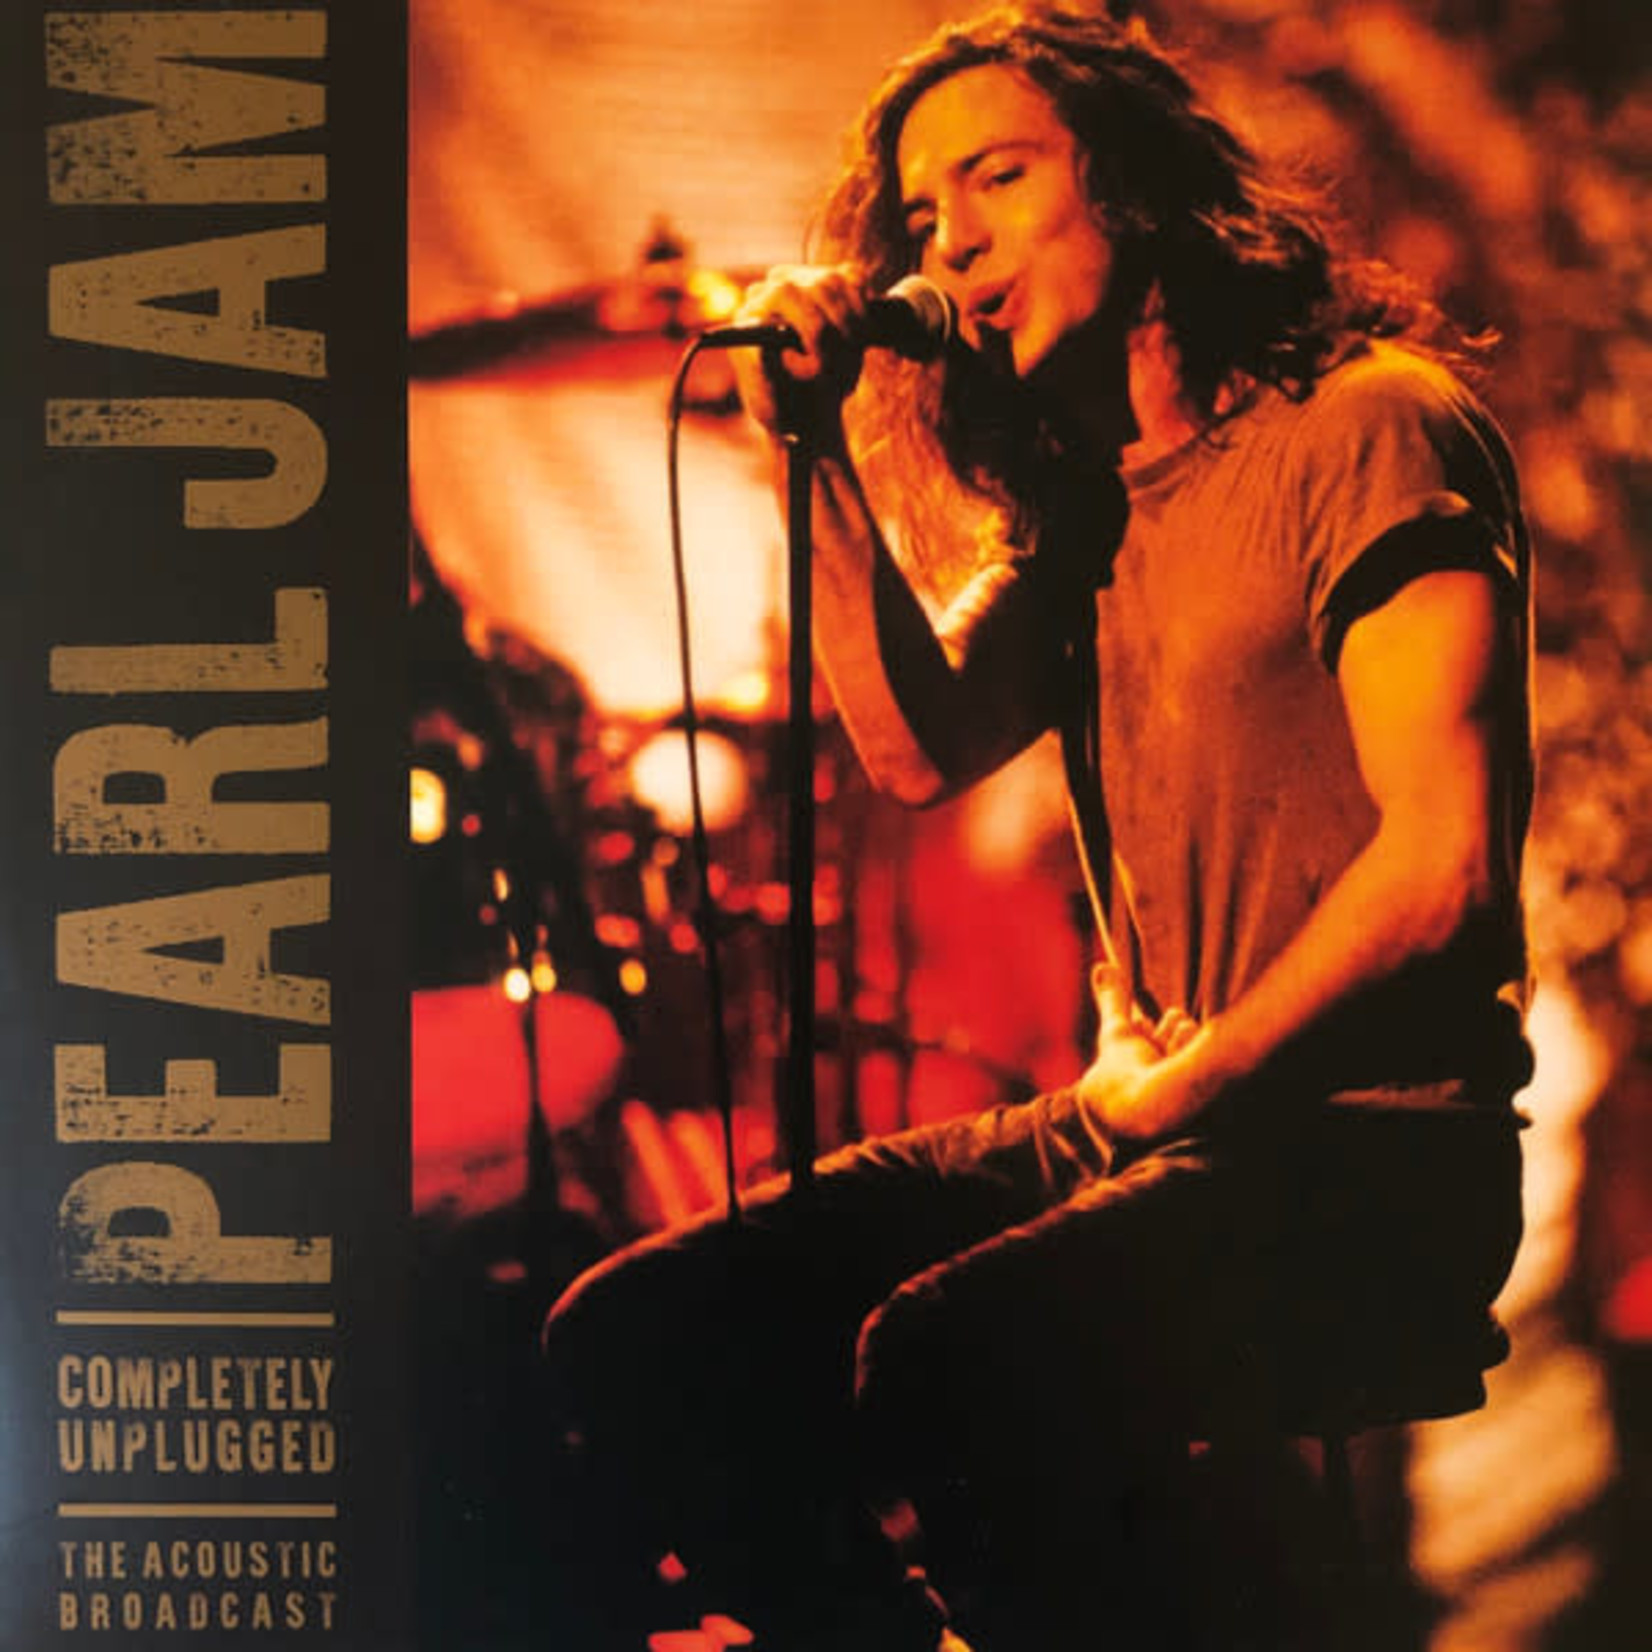 [New] Pearl Jam - Completely Unplugged (2LP, red vinyl)